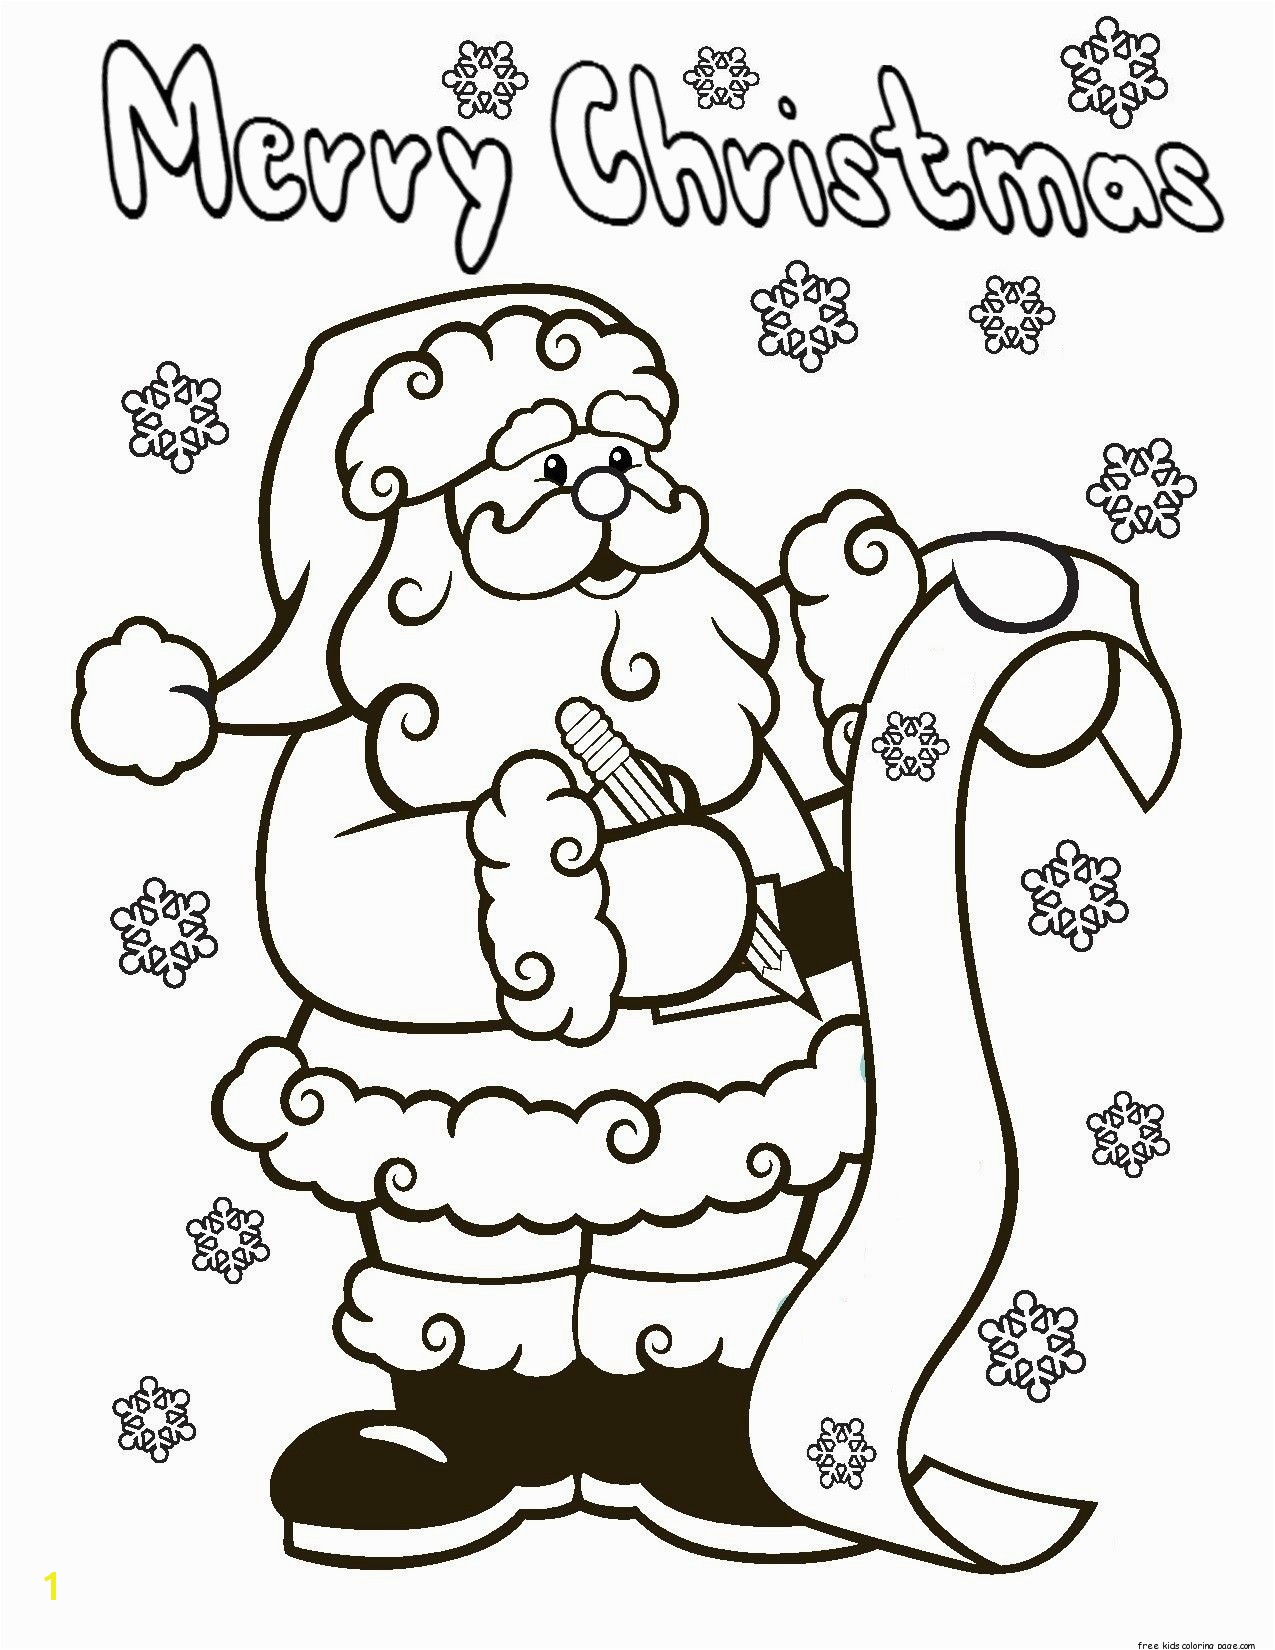 Merry Christmas Coloring Pages For Kids Free Printable Sheets Colouring Adults line Toddlers Merry Christmas Coloring